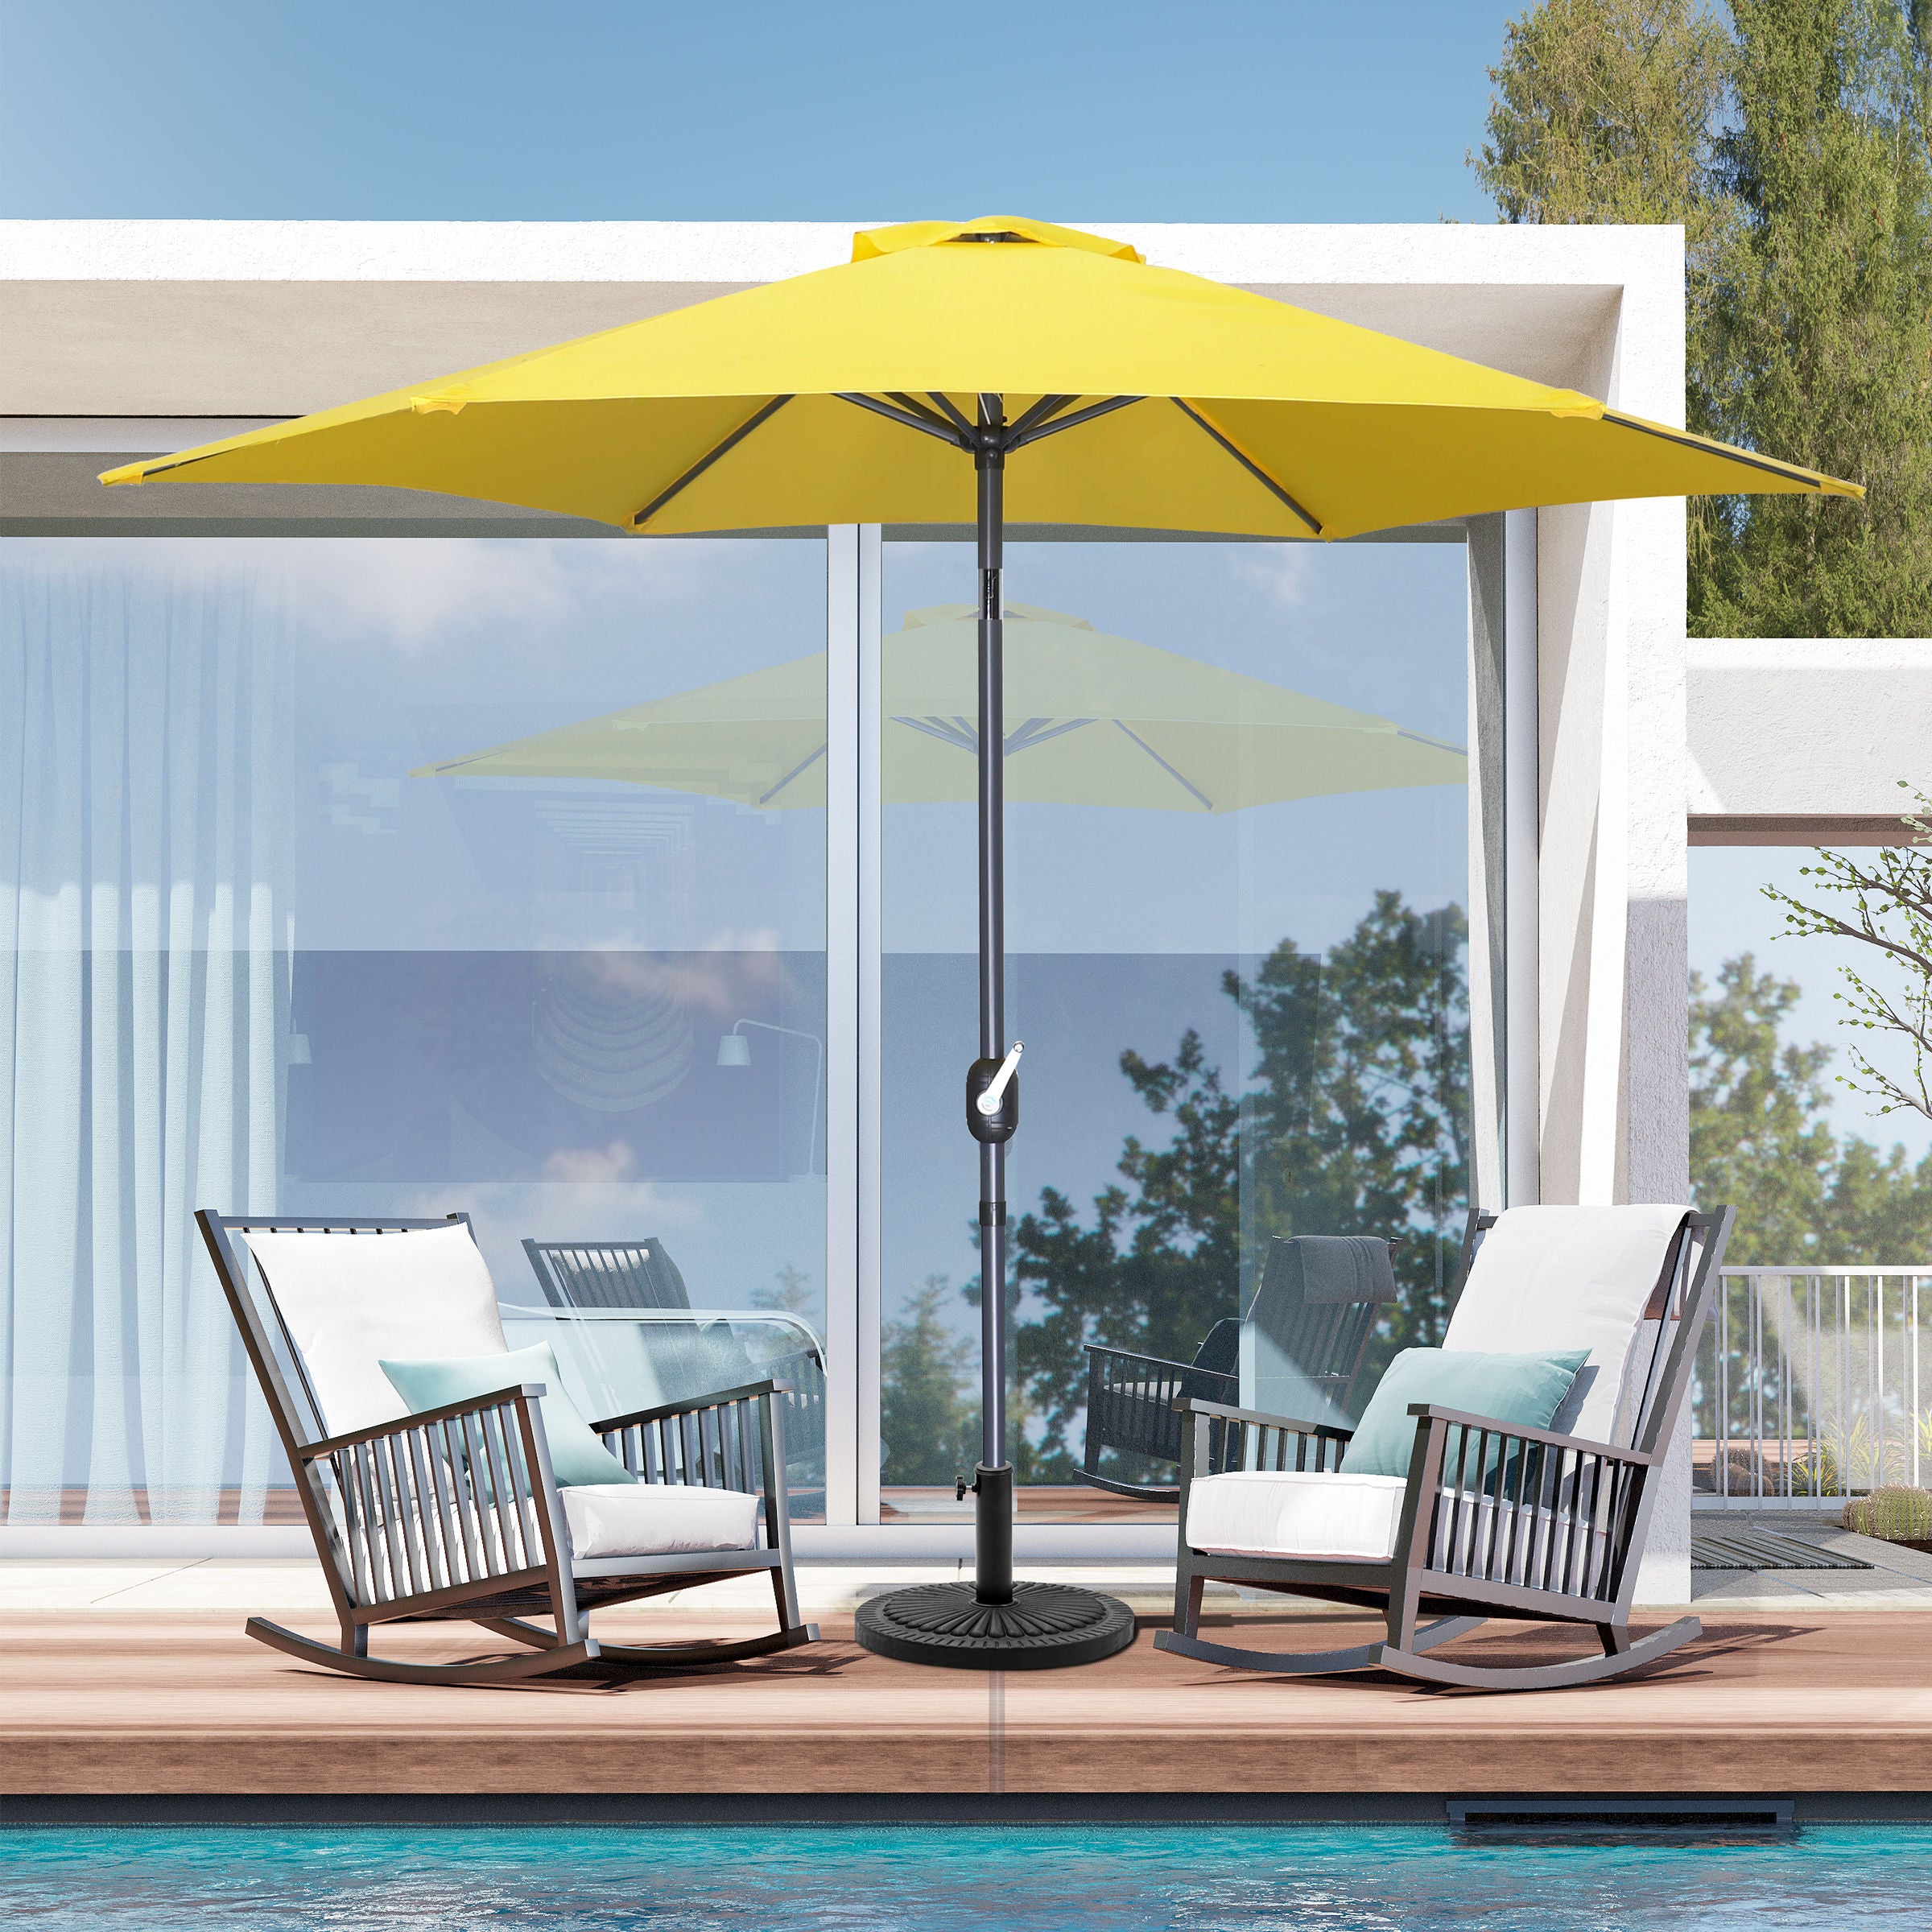 PatioZone 9' Tilting Market Umbrella (Cover Incl.) in UV-Protected Polyester (MOSS-T1204J) - Yellow